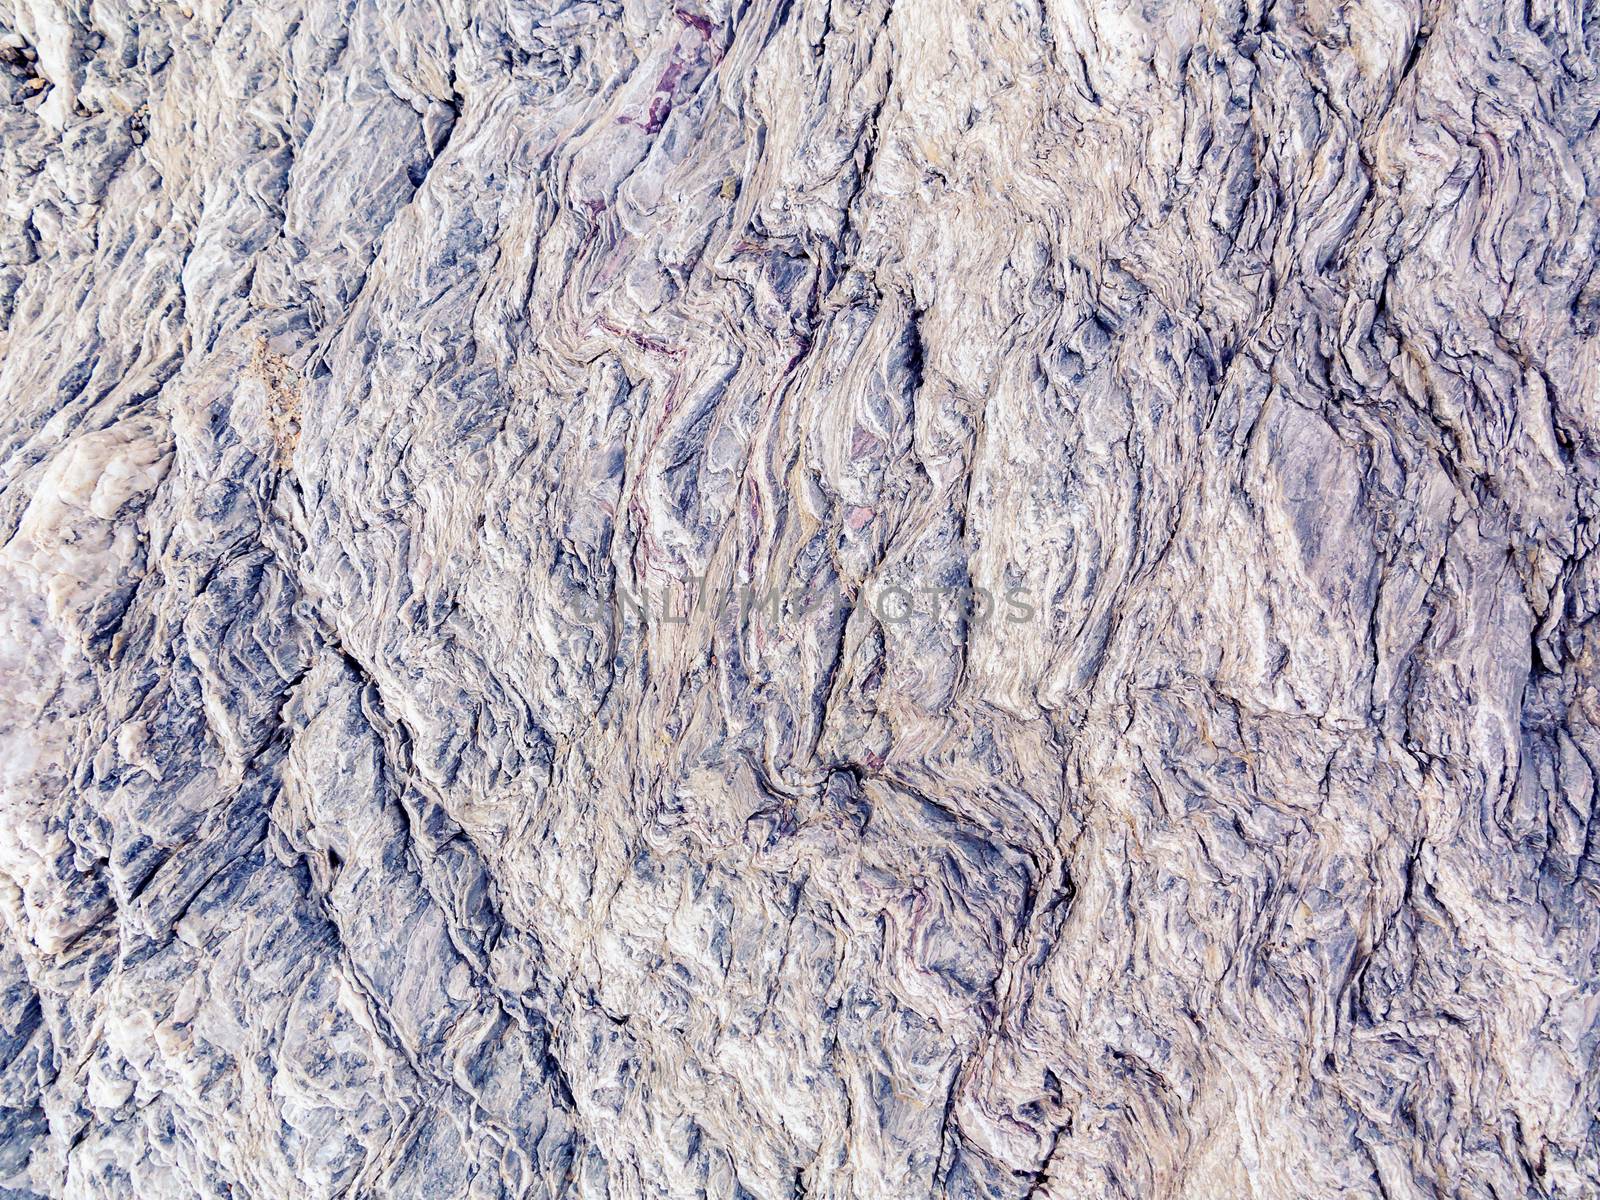 Slate stone surface in the mountains near Muscat, Oman by galsand